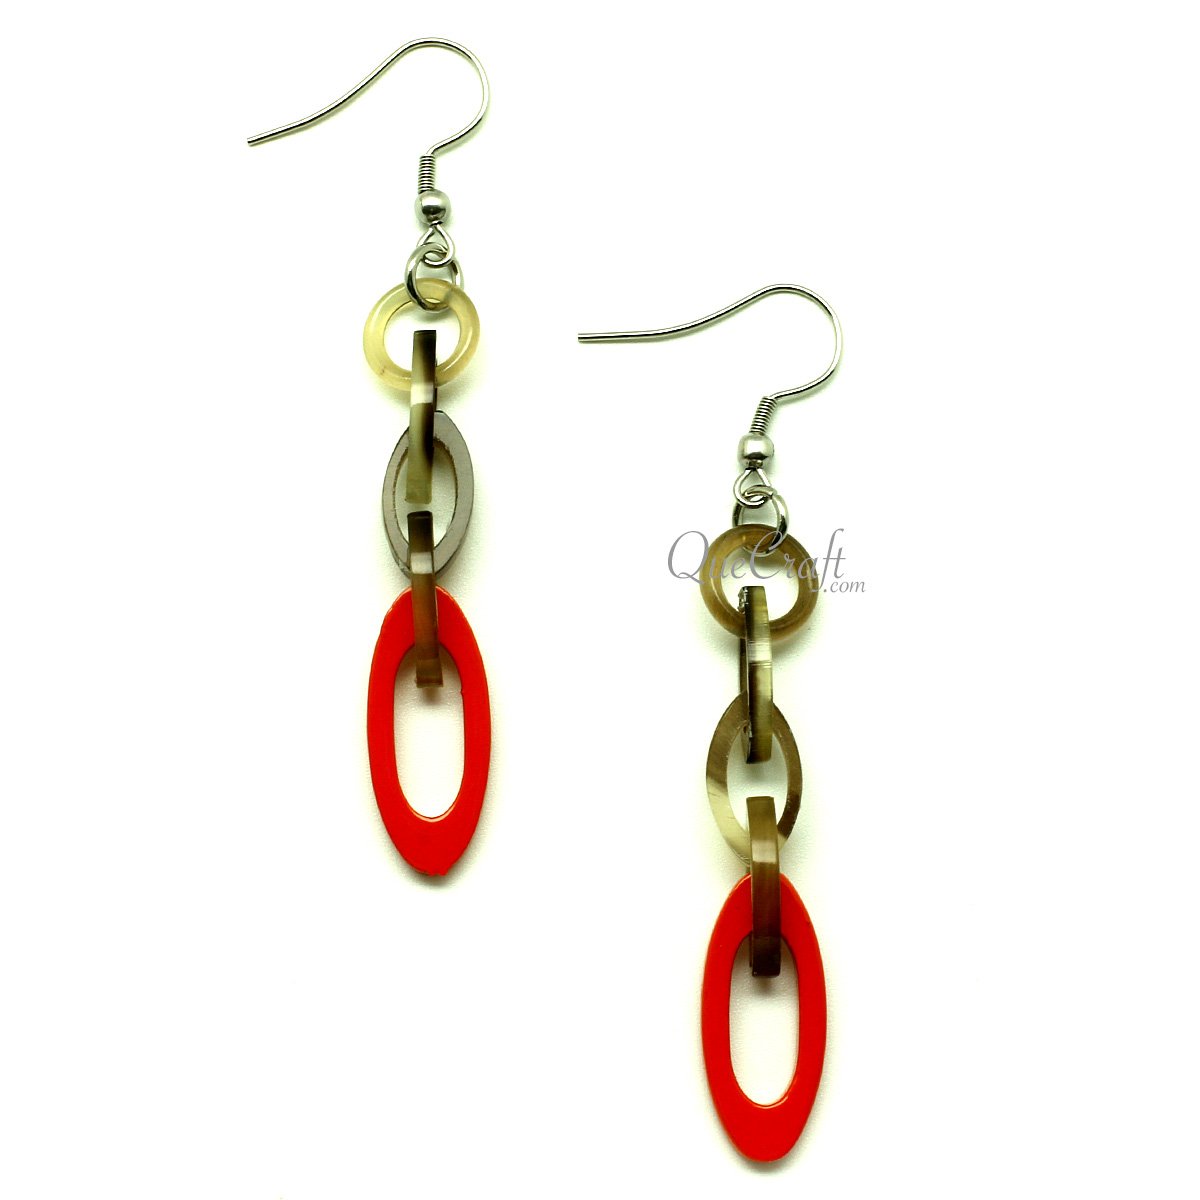 Horn & Lacquer Earrings #13188 - HORN JEWELRY